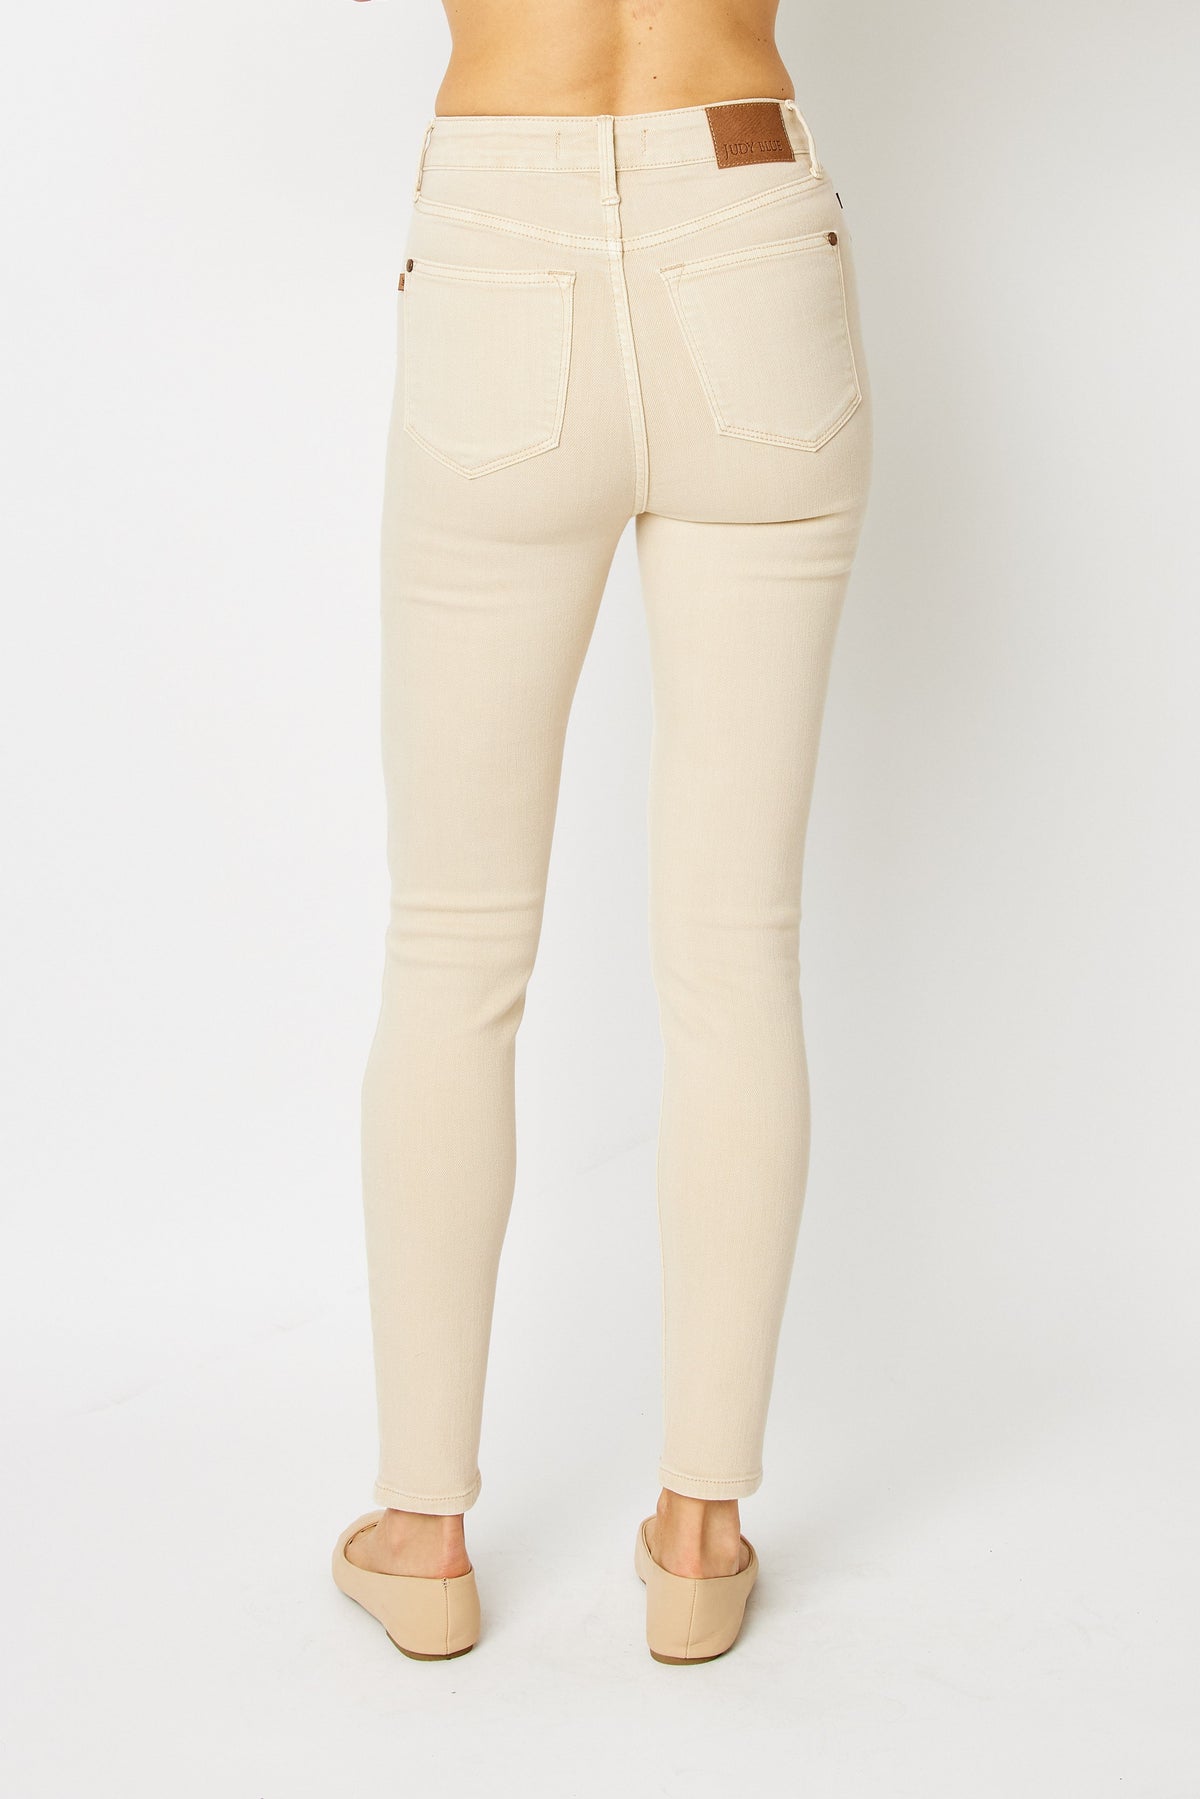 judy blue high wasted garmet dyed tummy control skinny jeans in bone-back view